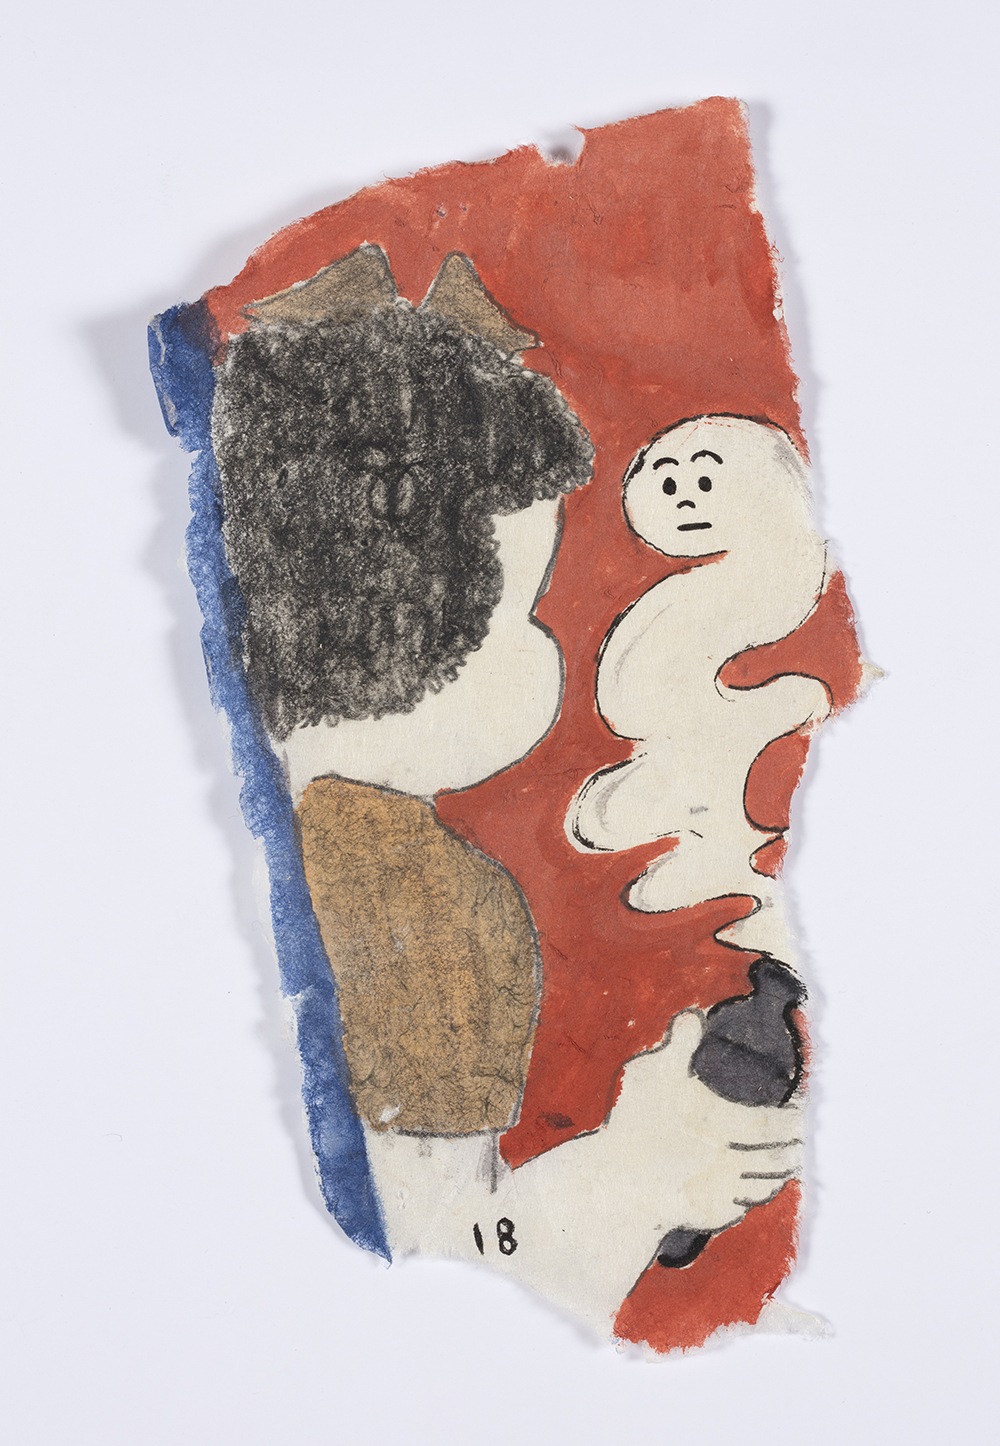 Kevin McNamee-Tweed. <em>Nancy with Genie or Ghost</em>, 2019. Graphite, colored pencil, and ink on mulberry paper, 6 3/4 x 3 1/2 inches  (17.1 x 8.9 cm)